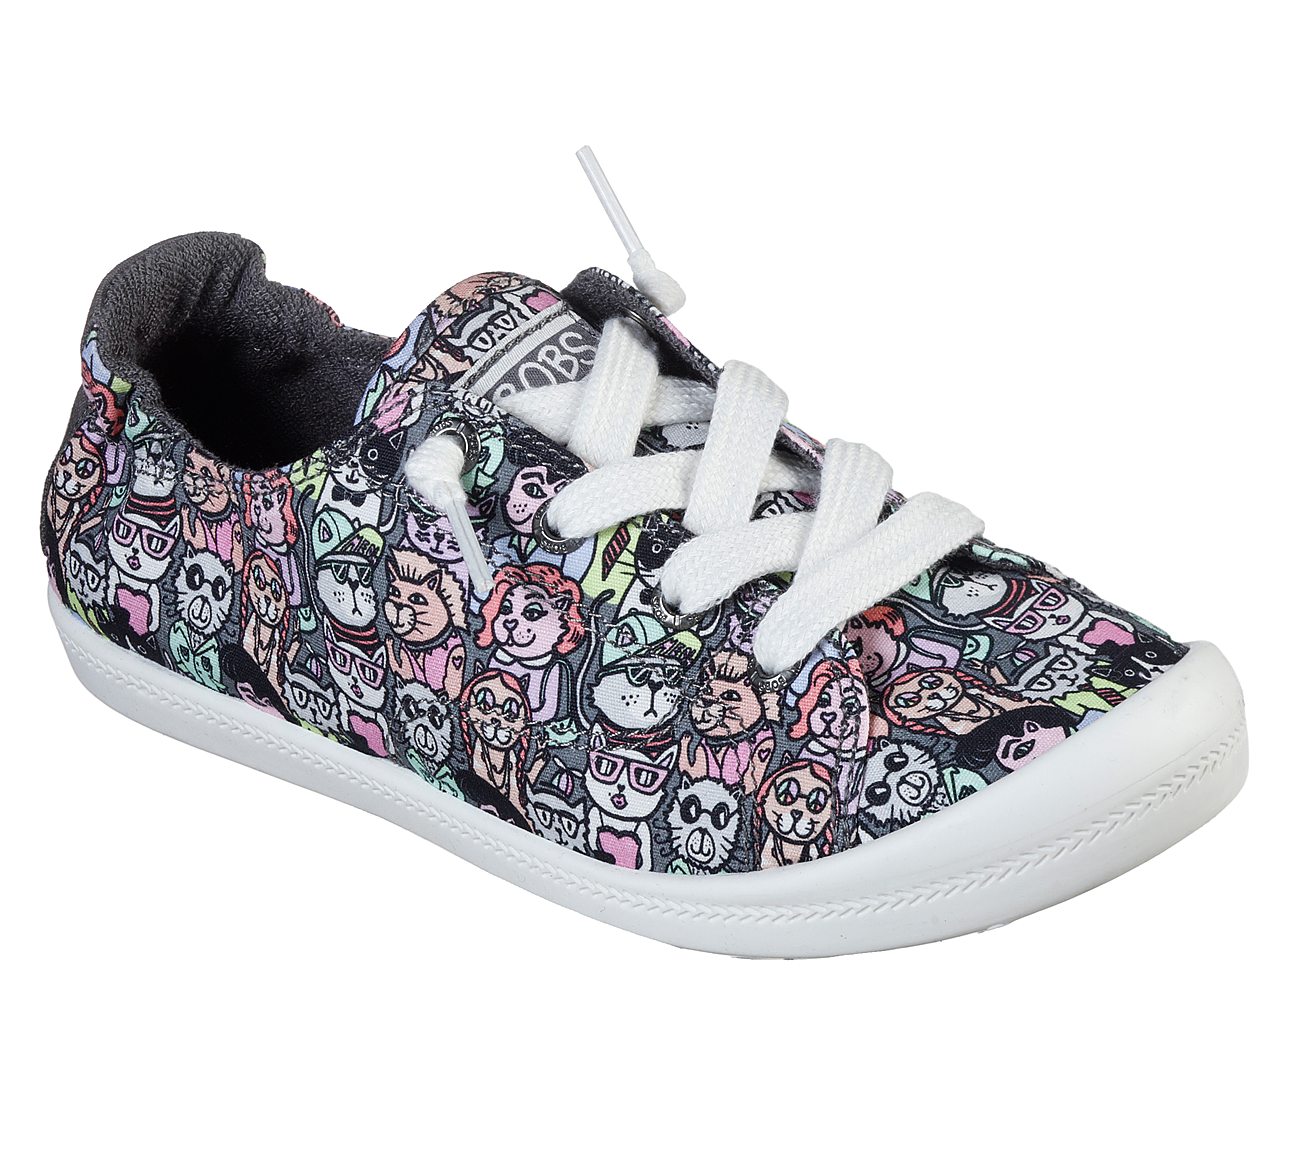 skechers with cats on them